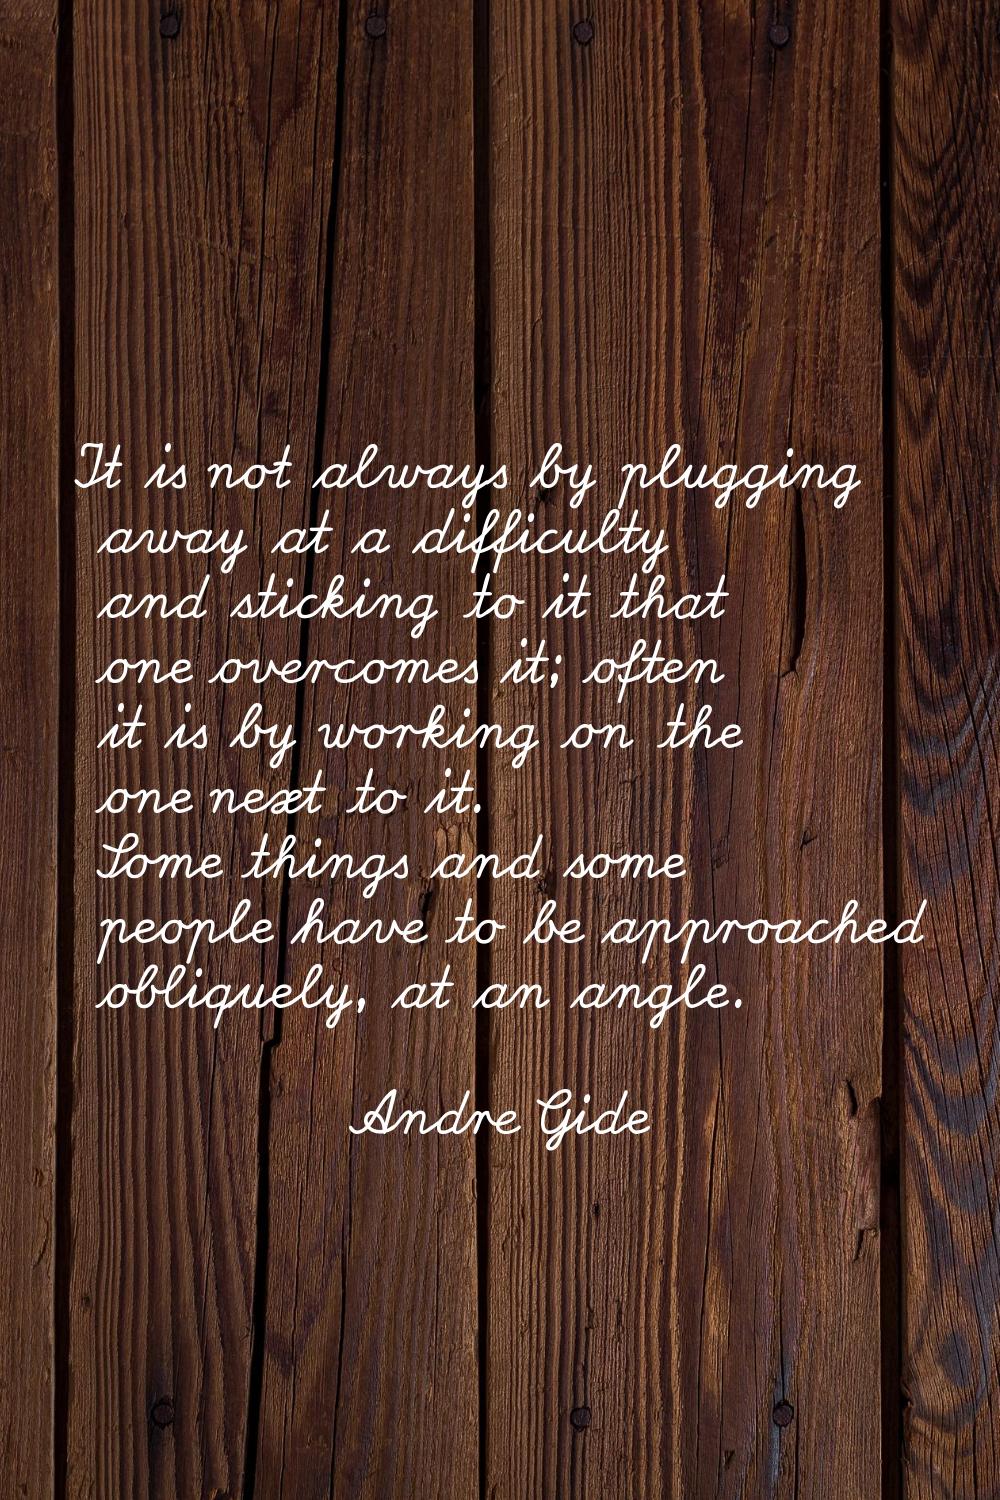 It is not always by plugging away at a difficulty and sticking to it that one overcomes it; often i